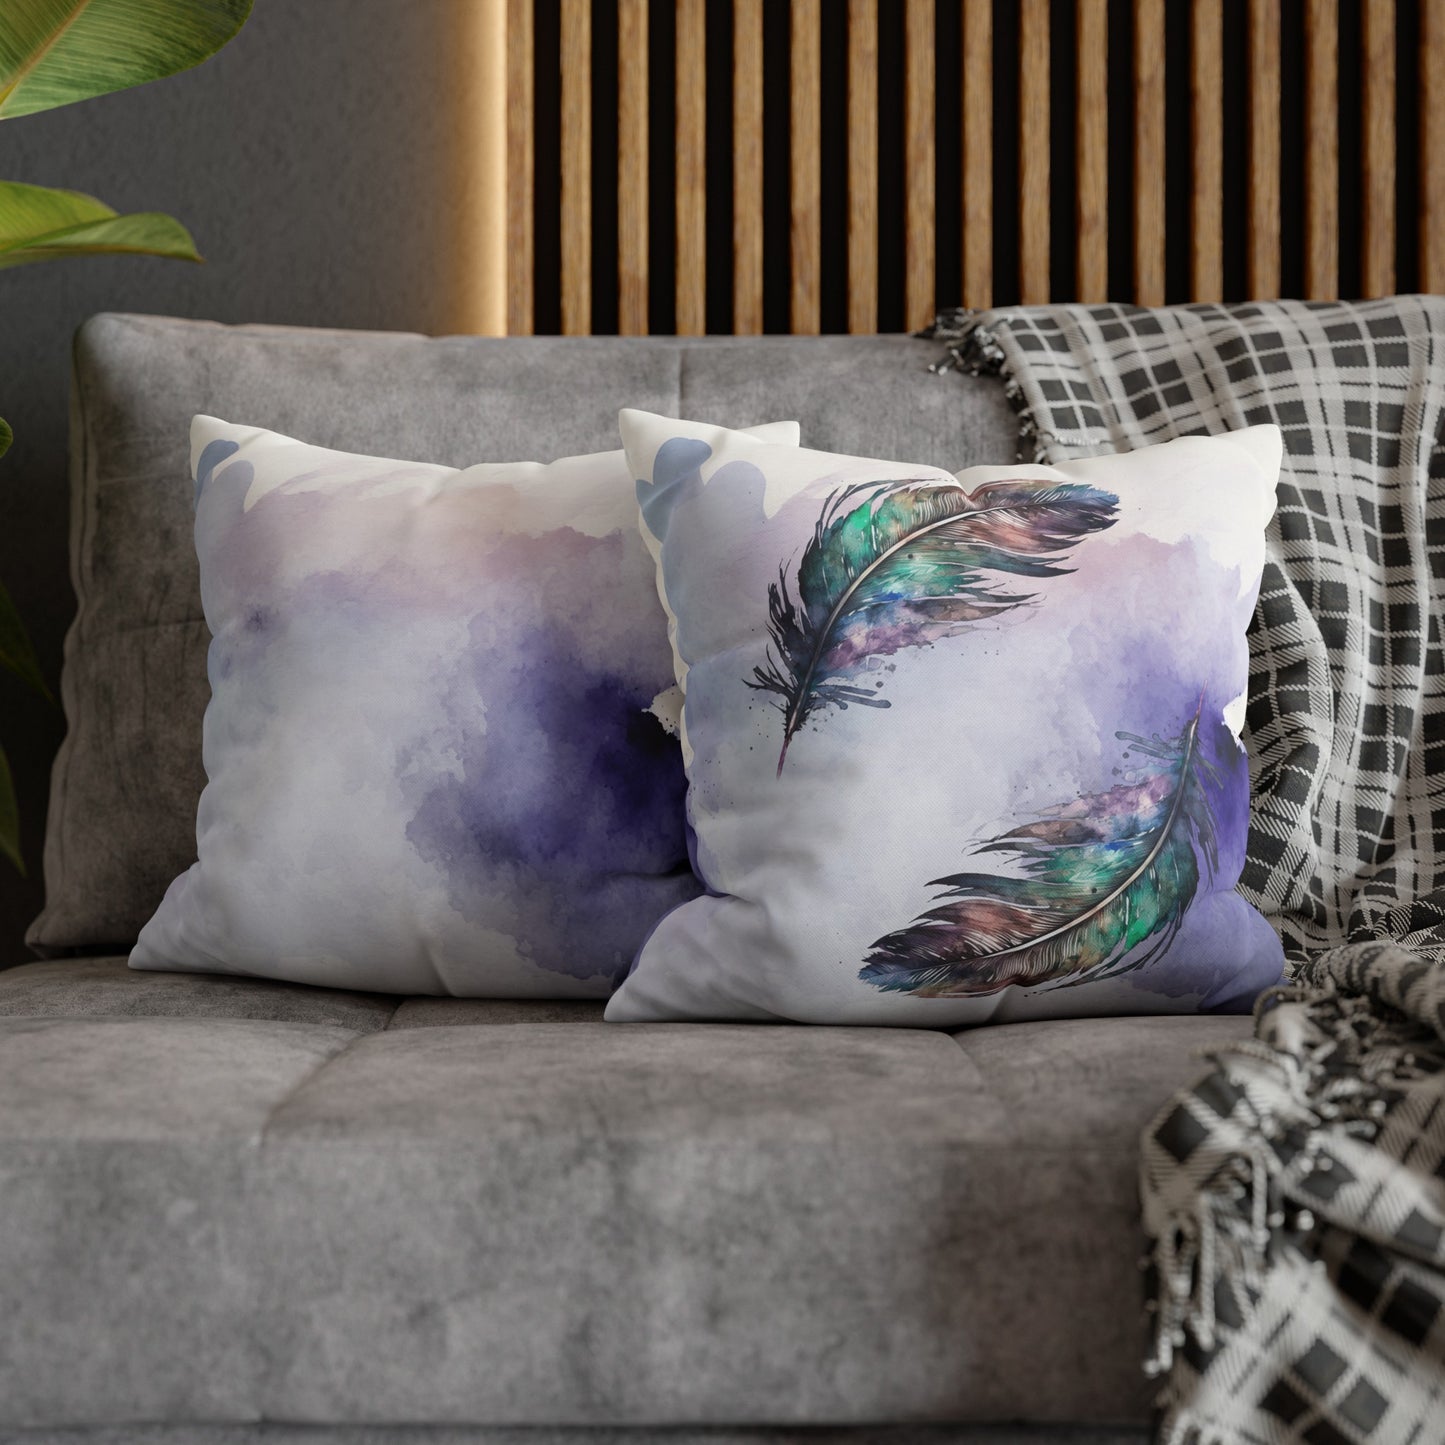 Feather On The Wind #8 Canvas Cushion Cover